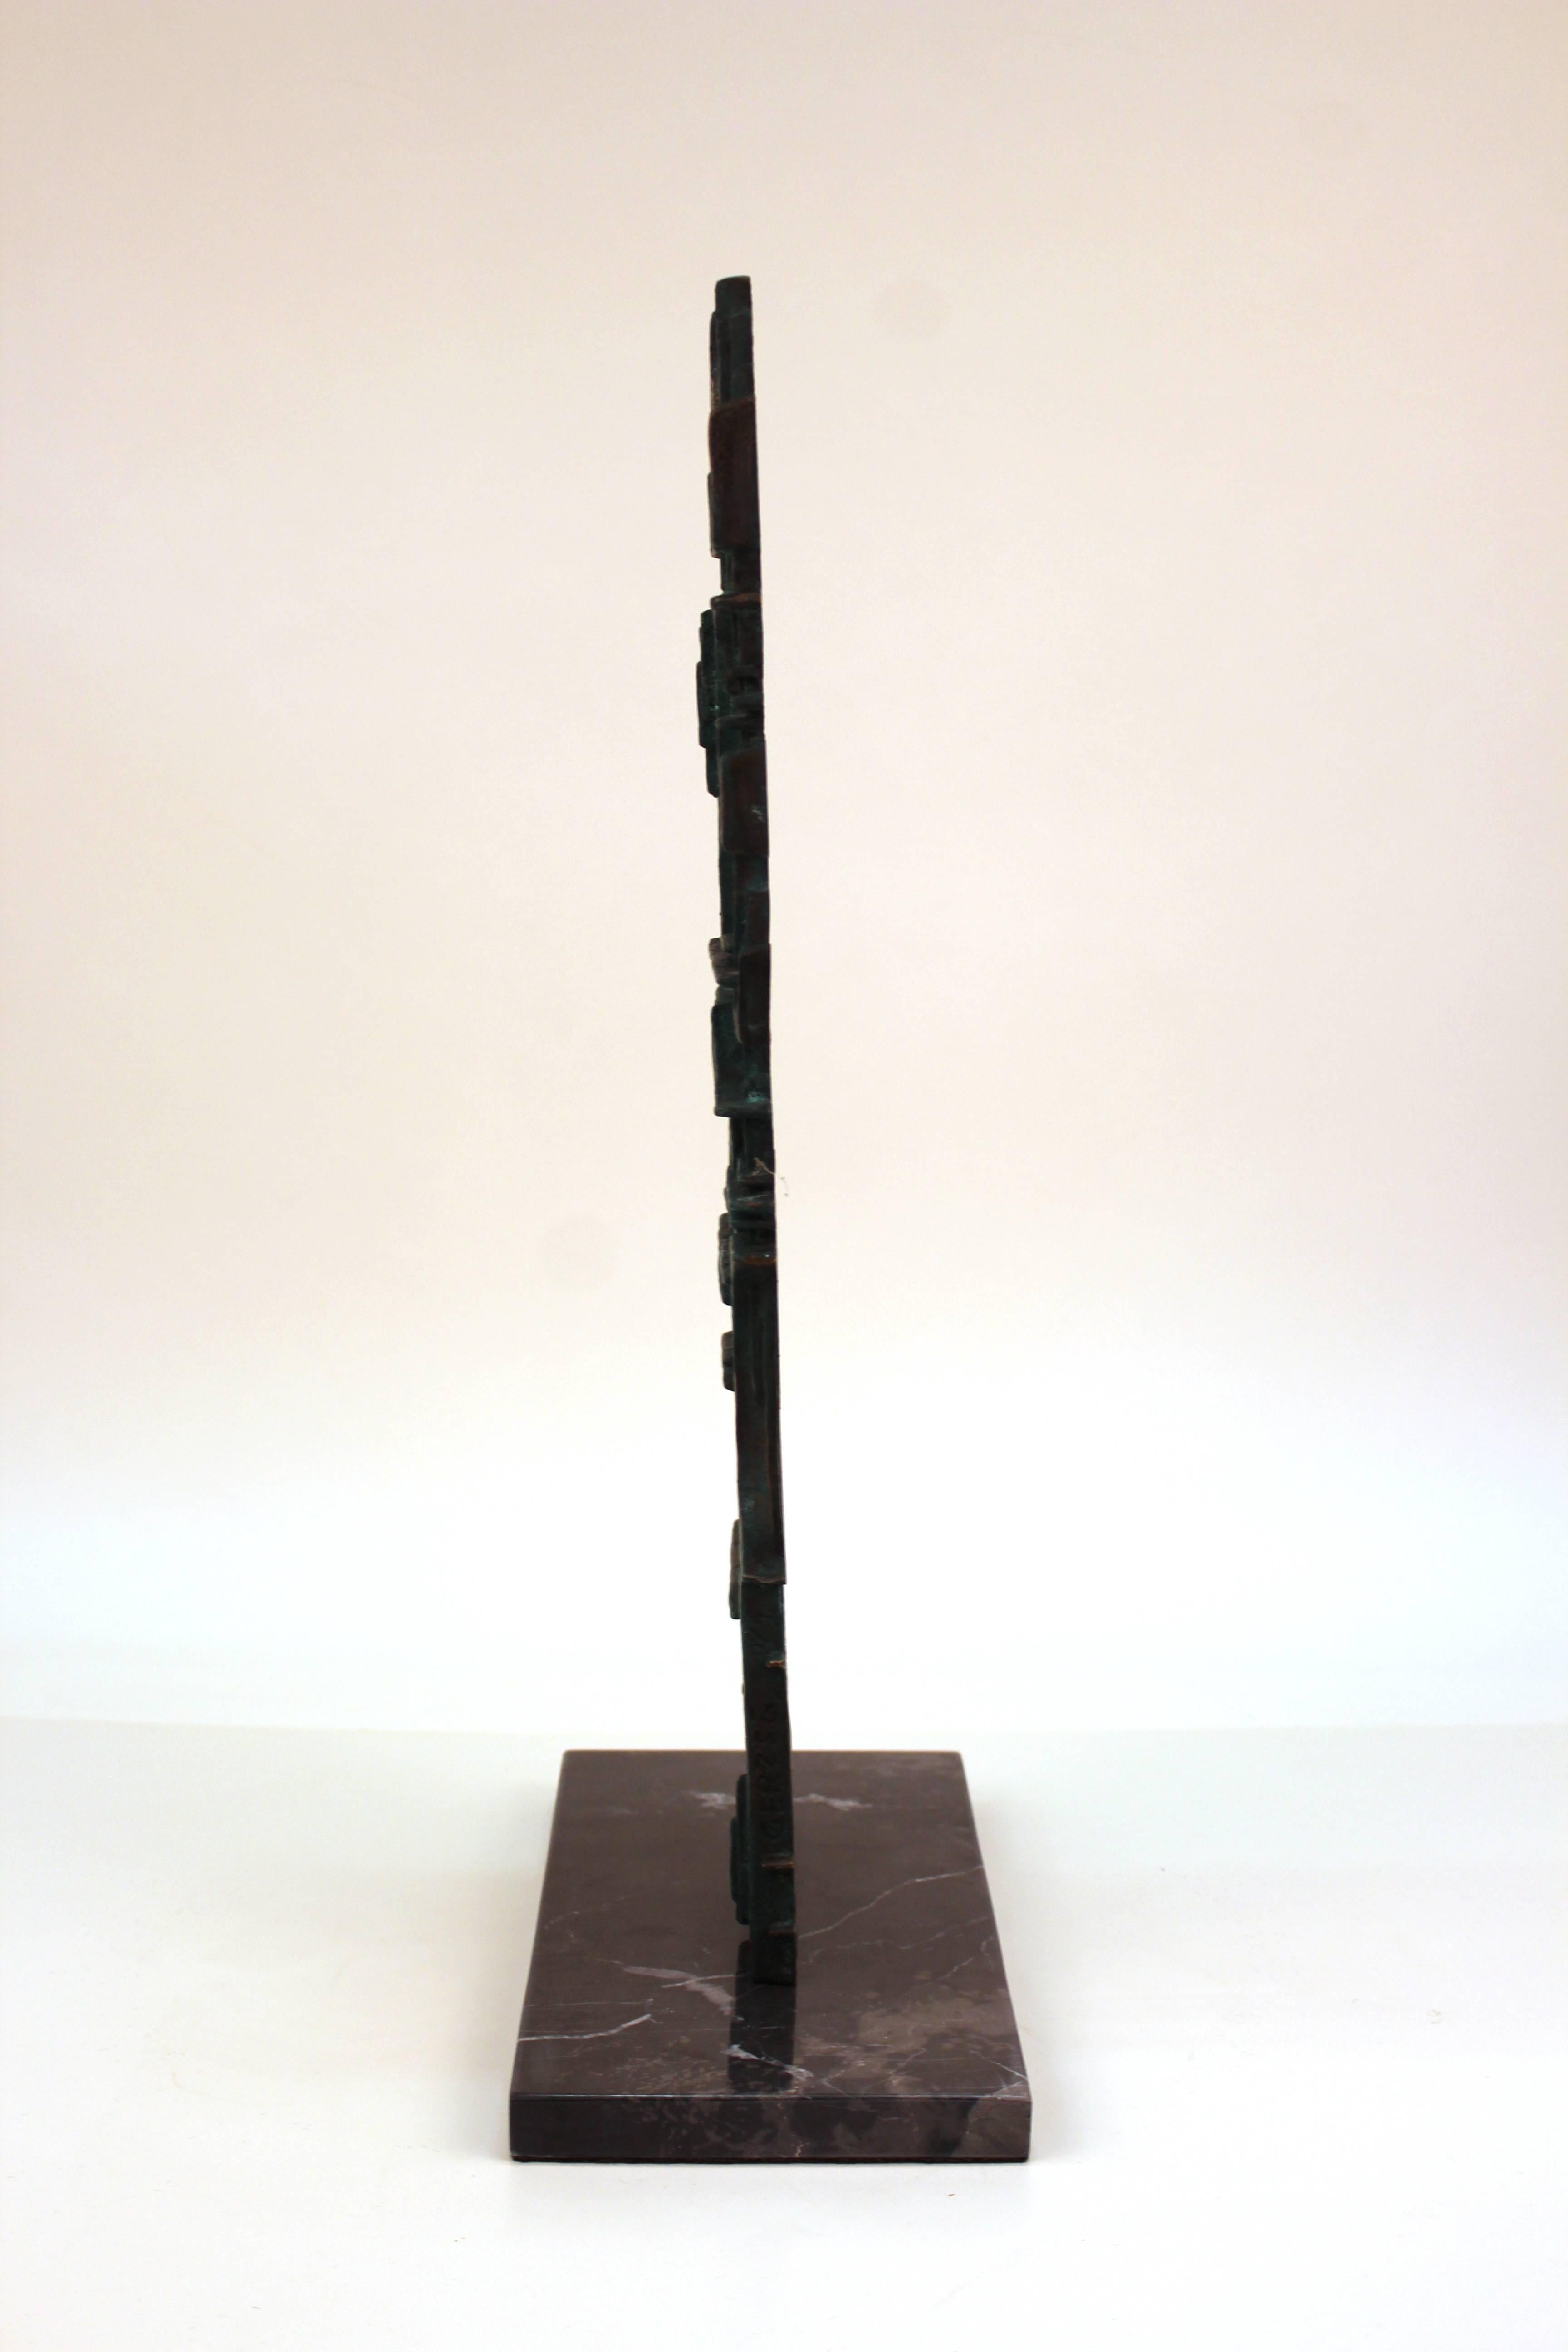 Gunther Gerzso Bronze Abstract Sculpture on Marble Base 1